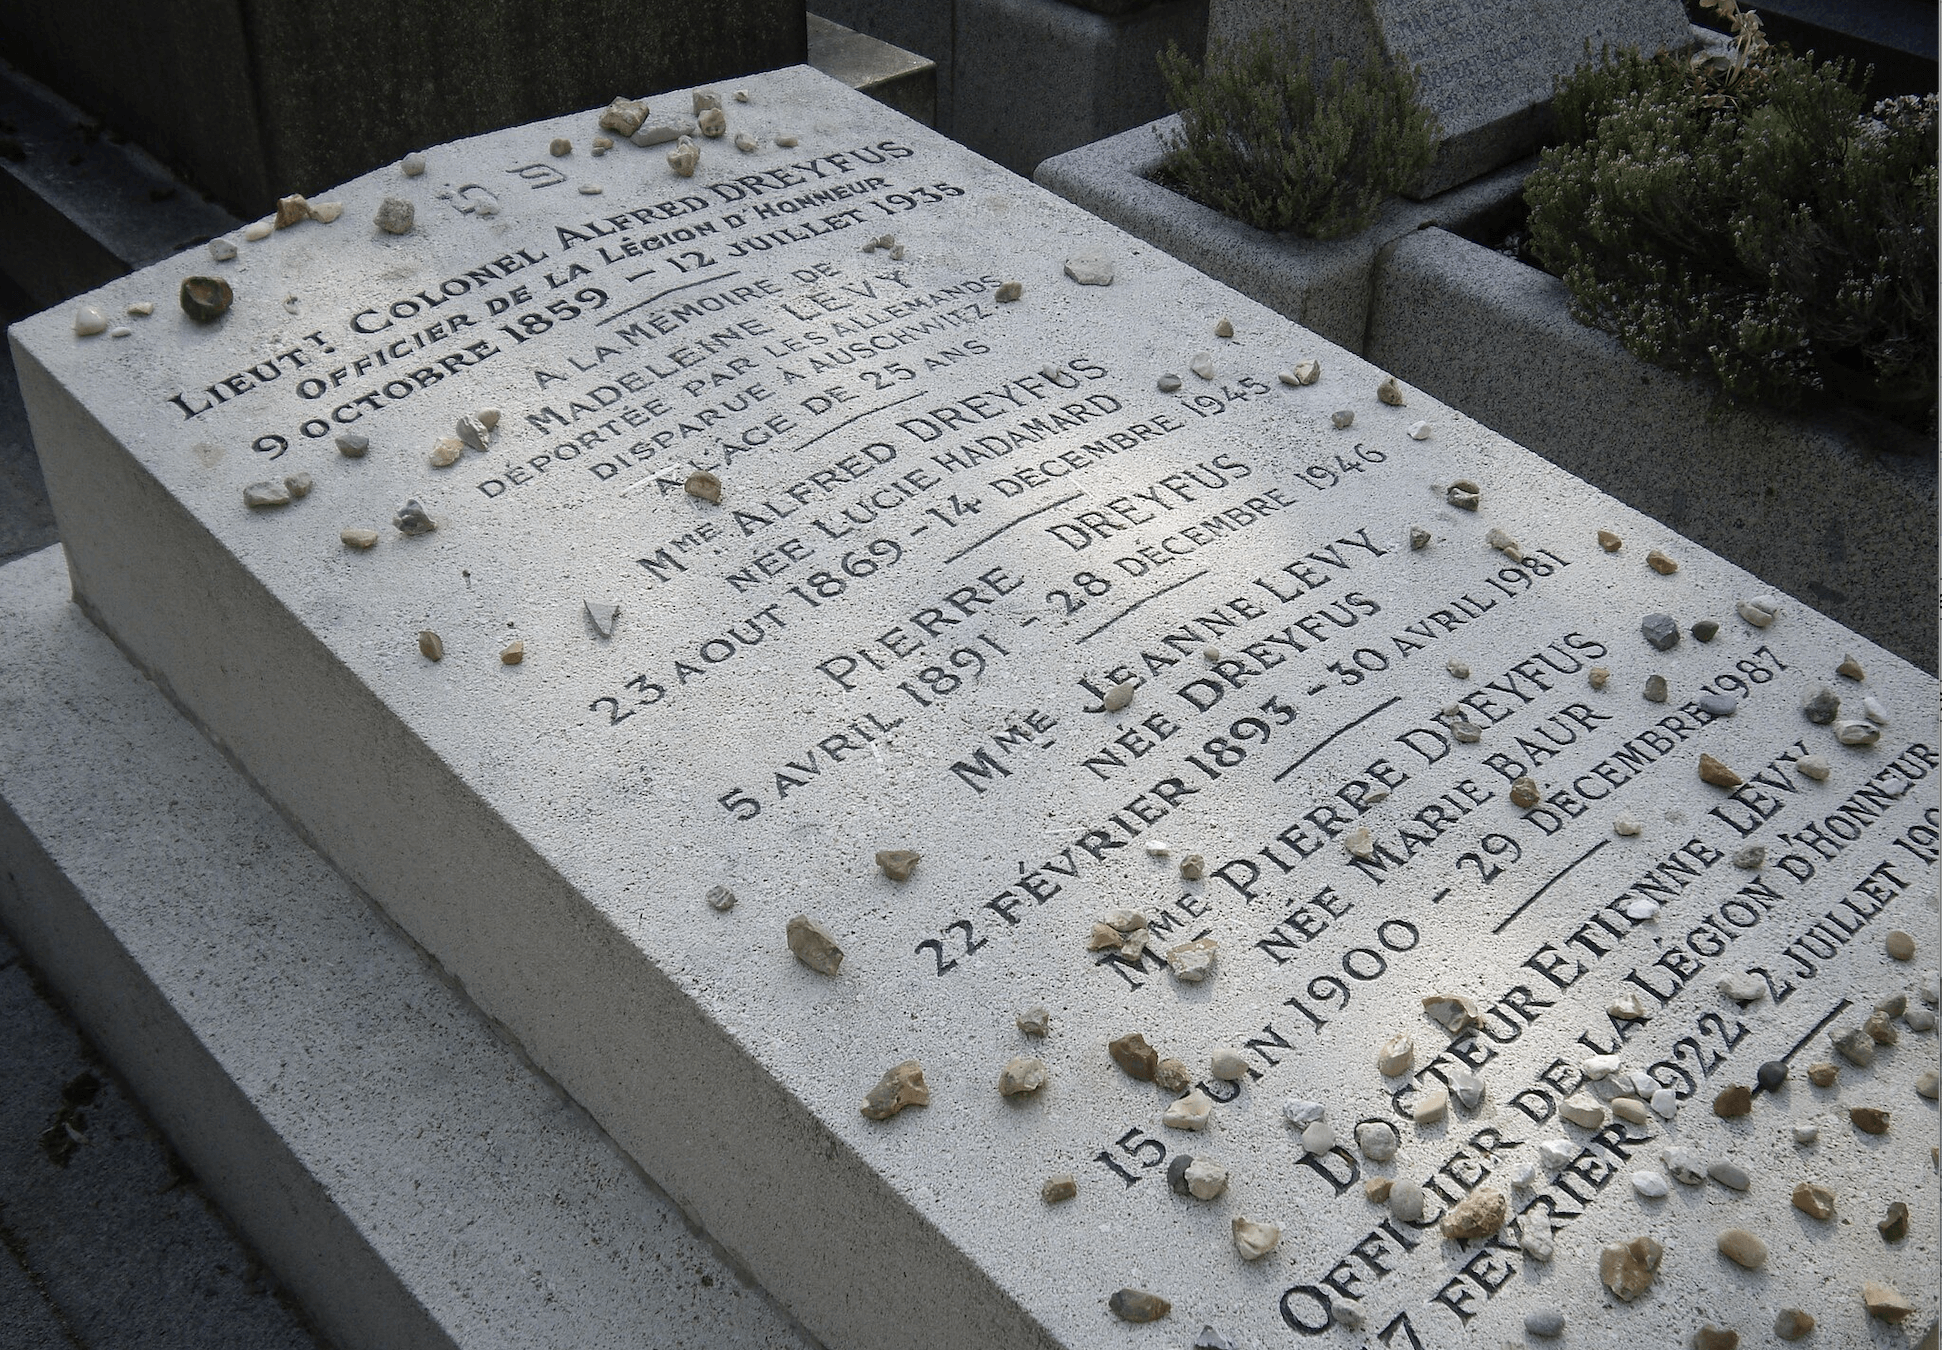 The tomb of Alfred Dreyfus, where Alfred Dreyfus Samuelson left his business card.